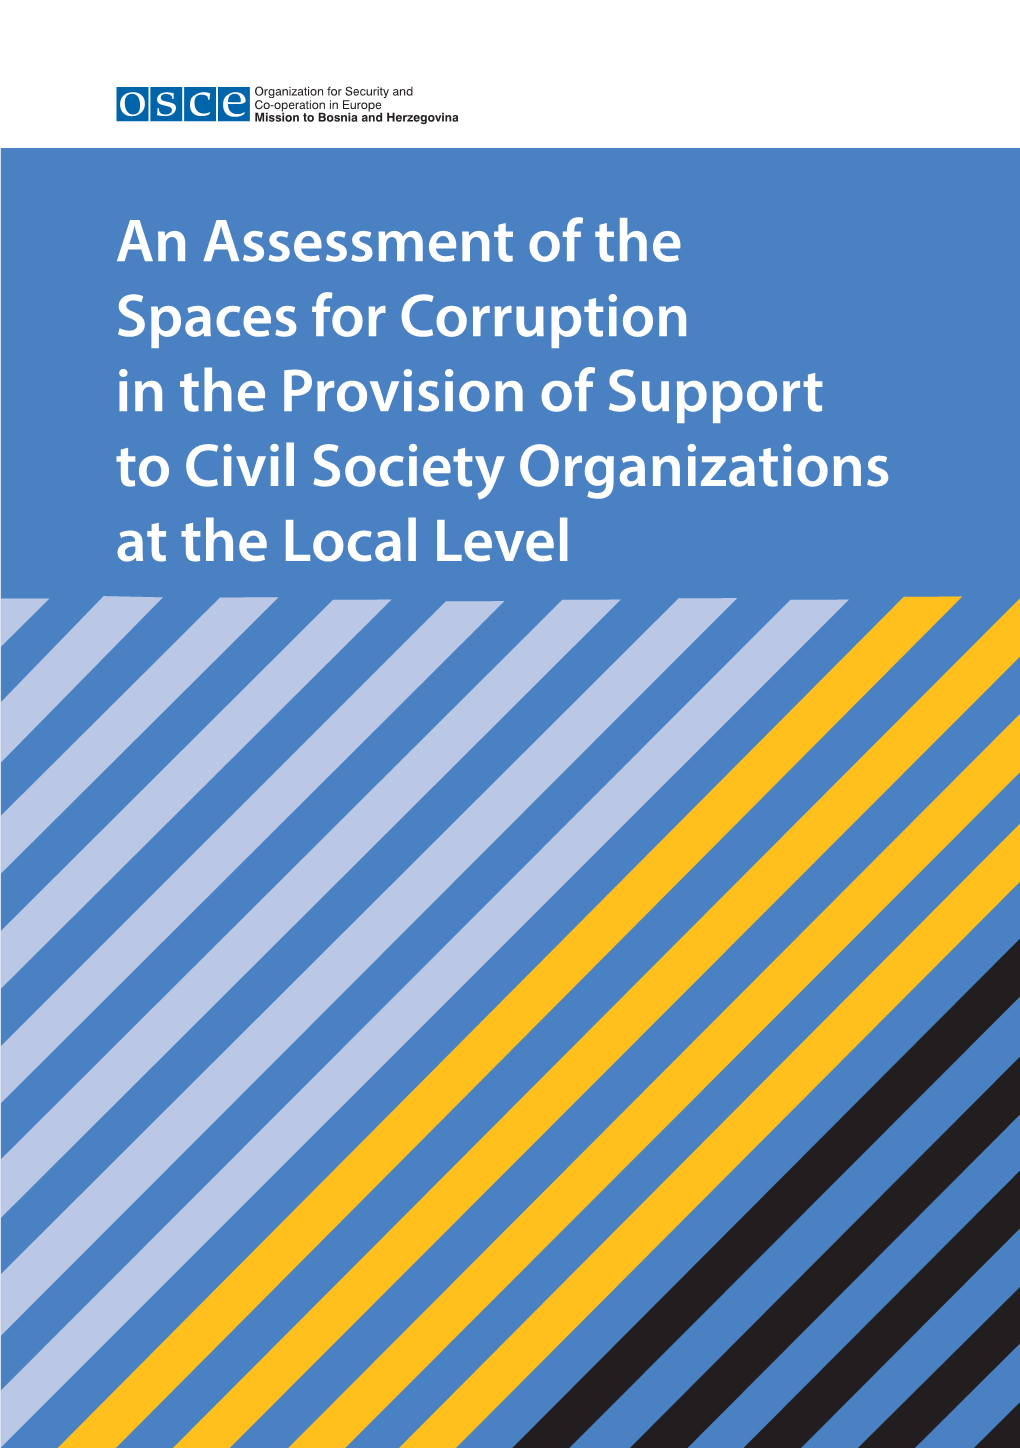 An Assessment of the Spaces for Corruption in the Provision of Support to Civil Society Organizations at the Local Level